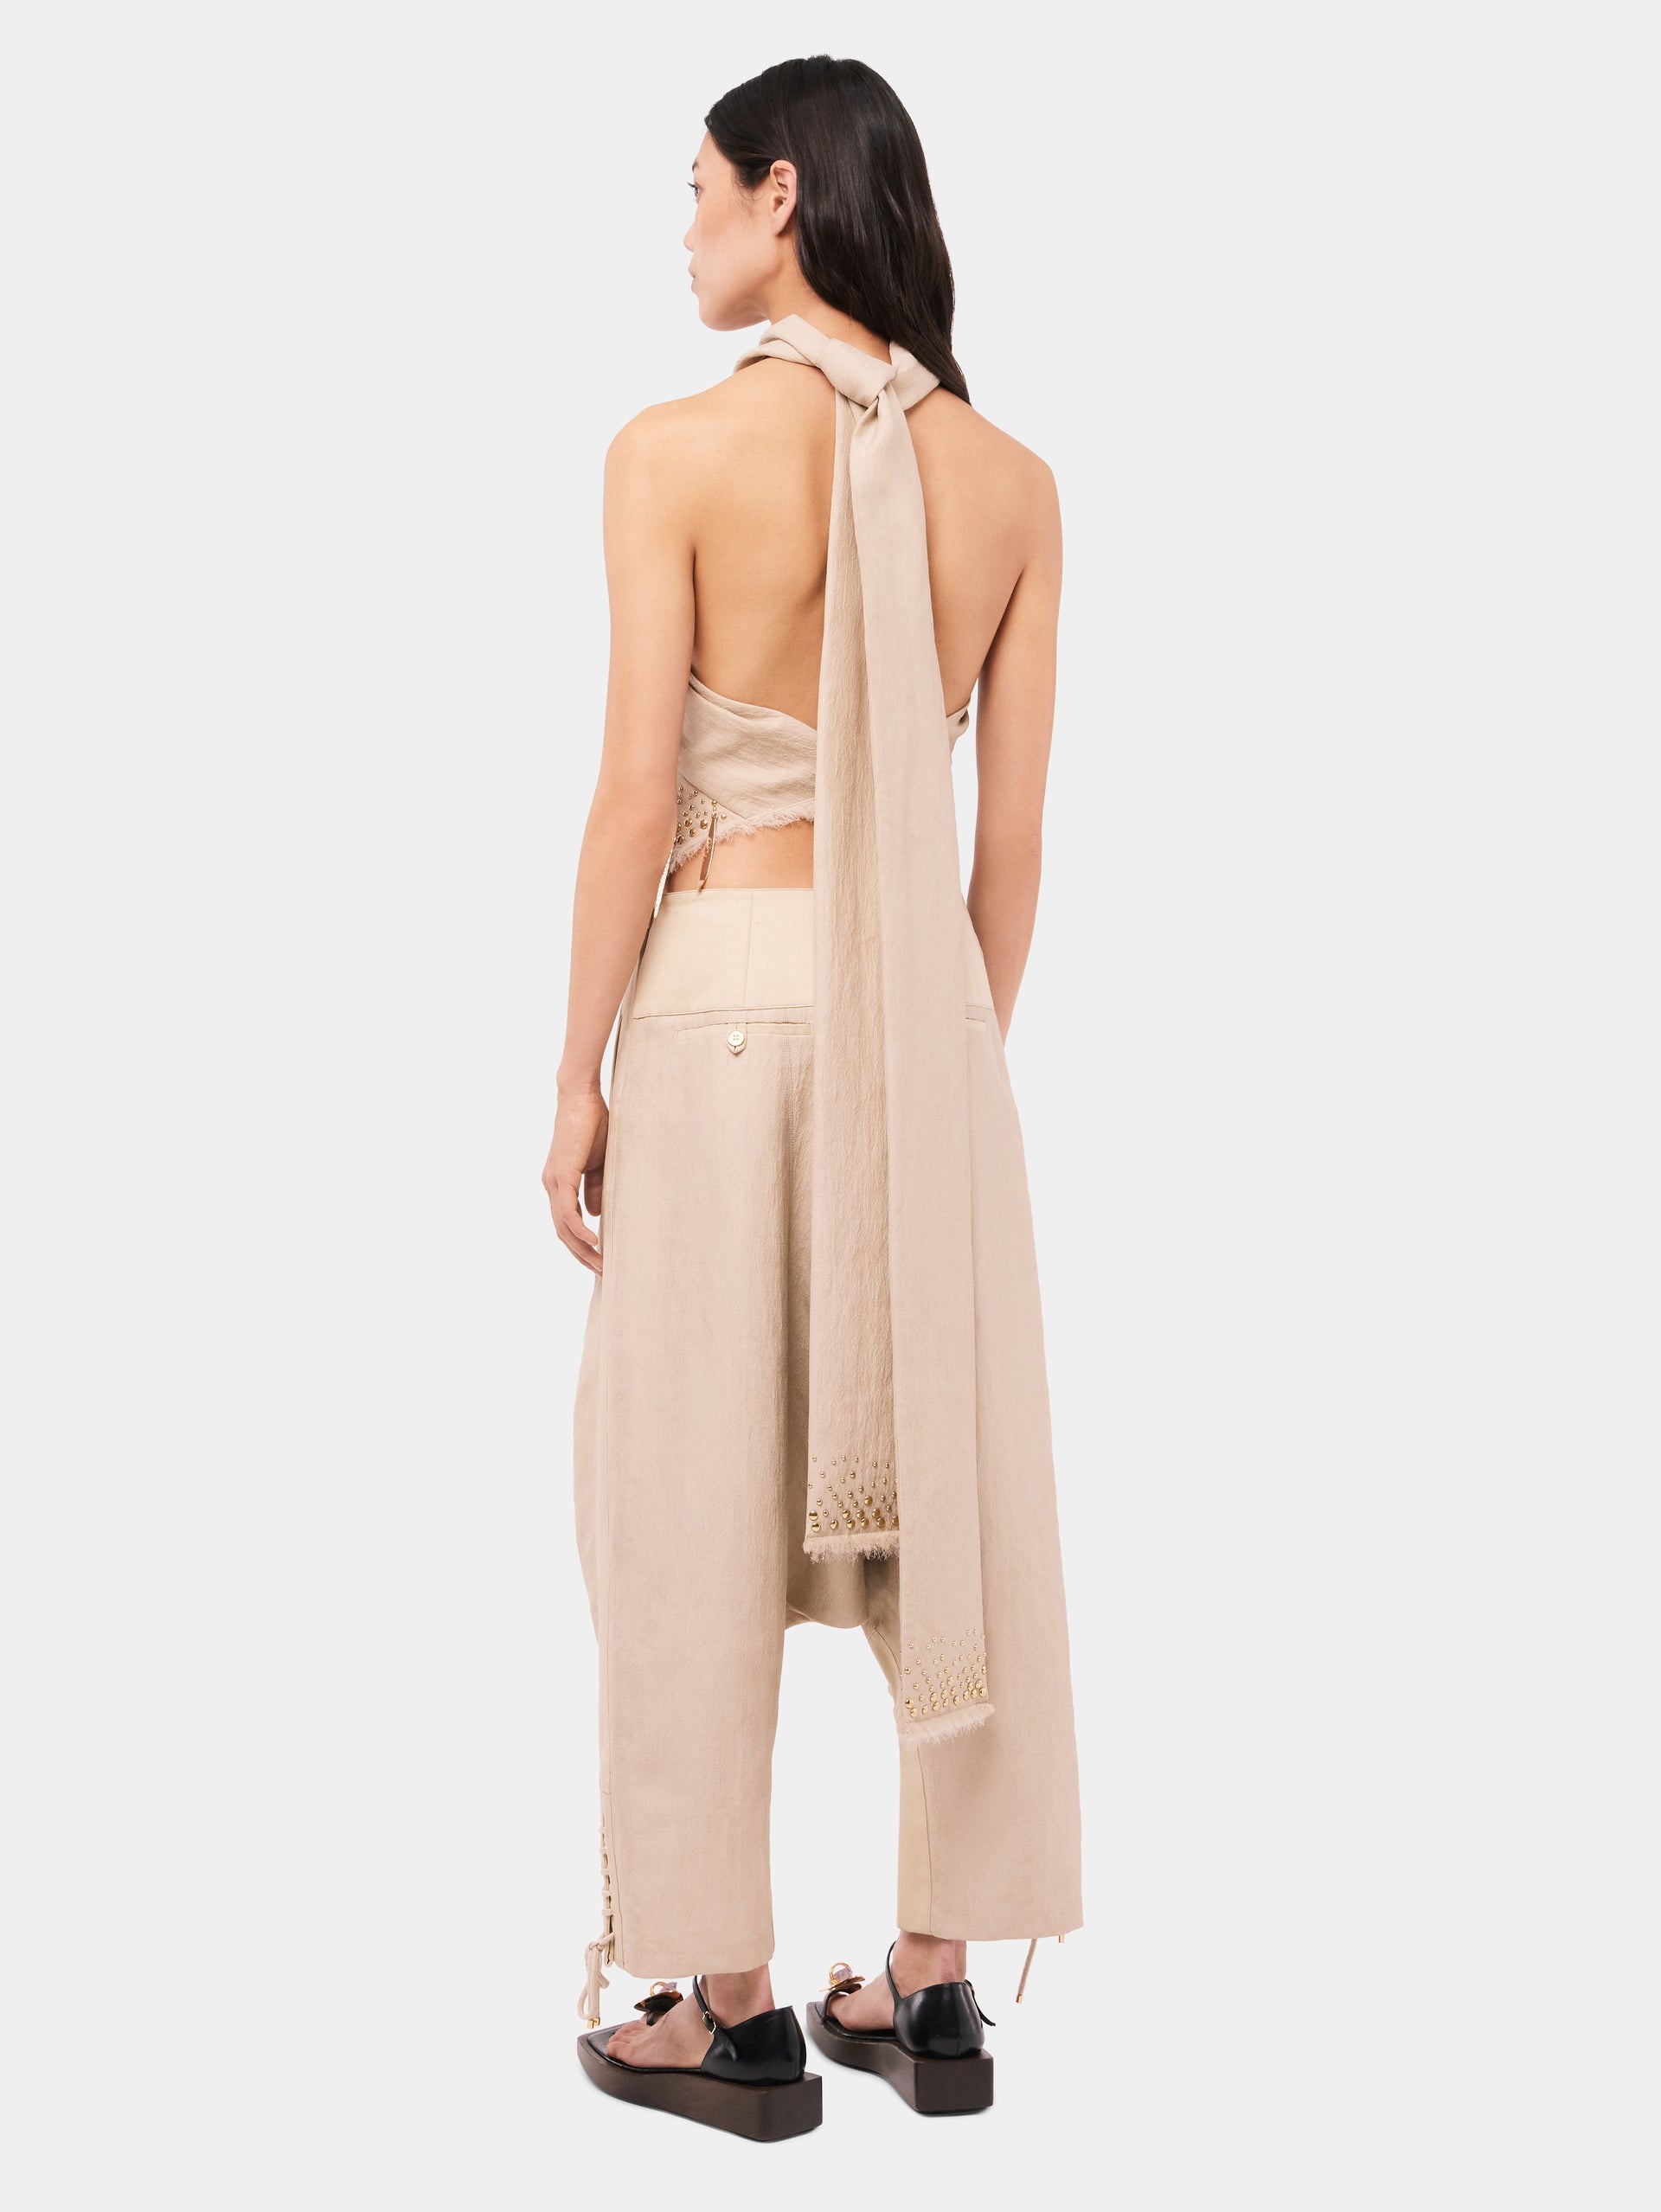 TAILORED BAGGY SAND COLORED PANTS IN WOOL - 3